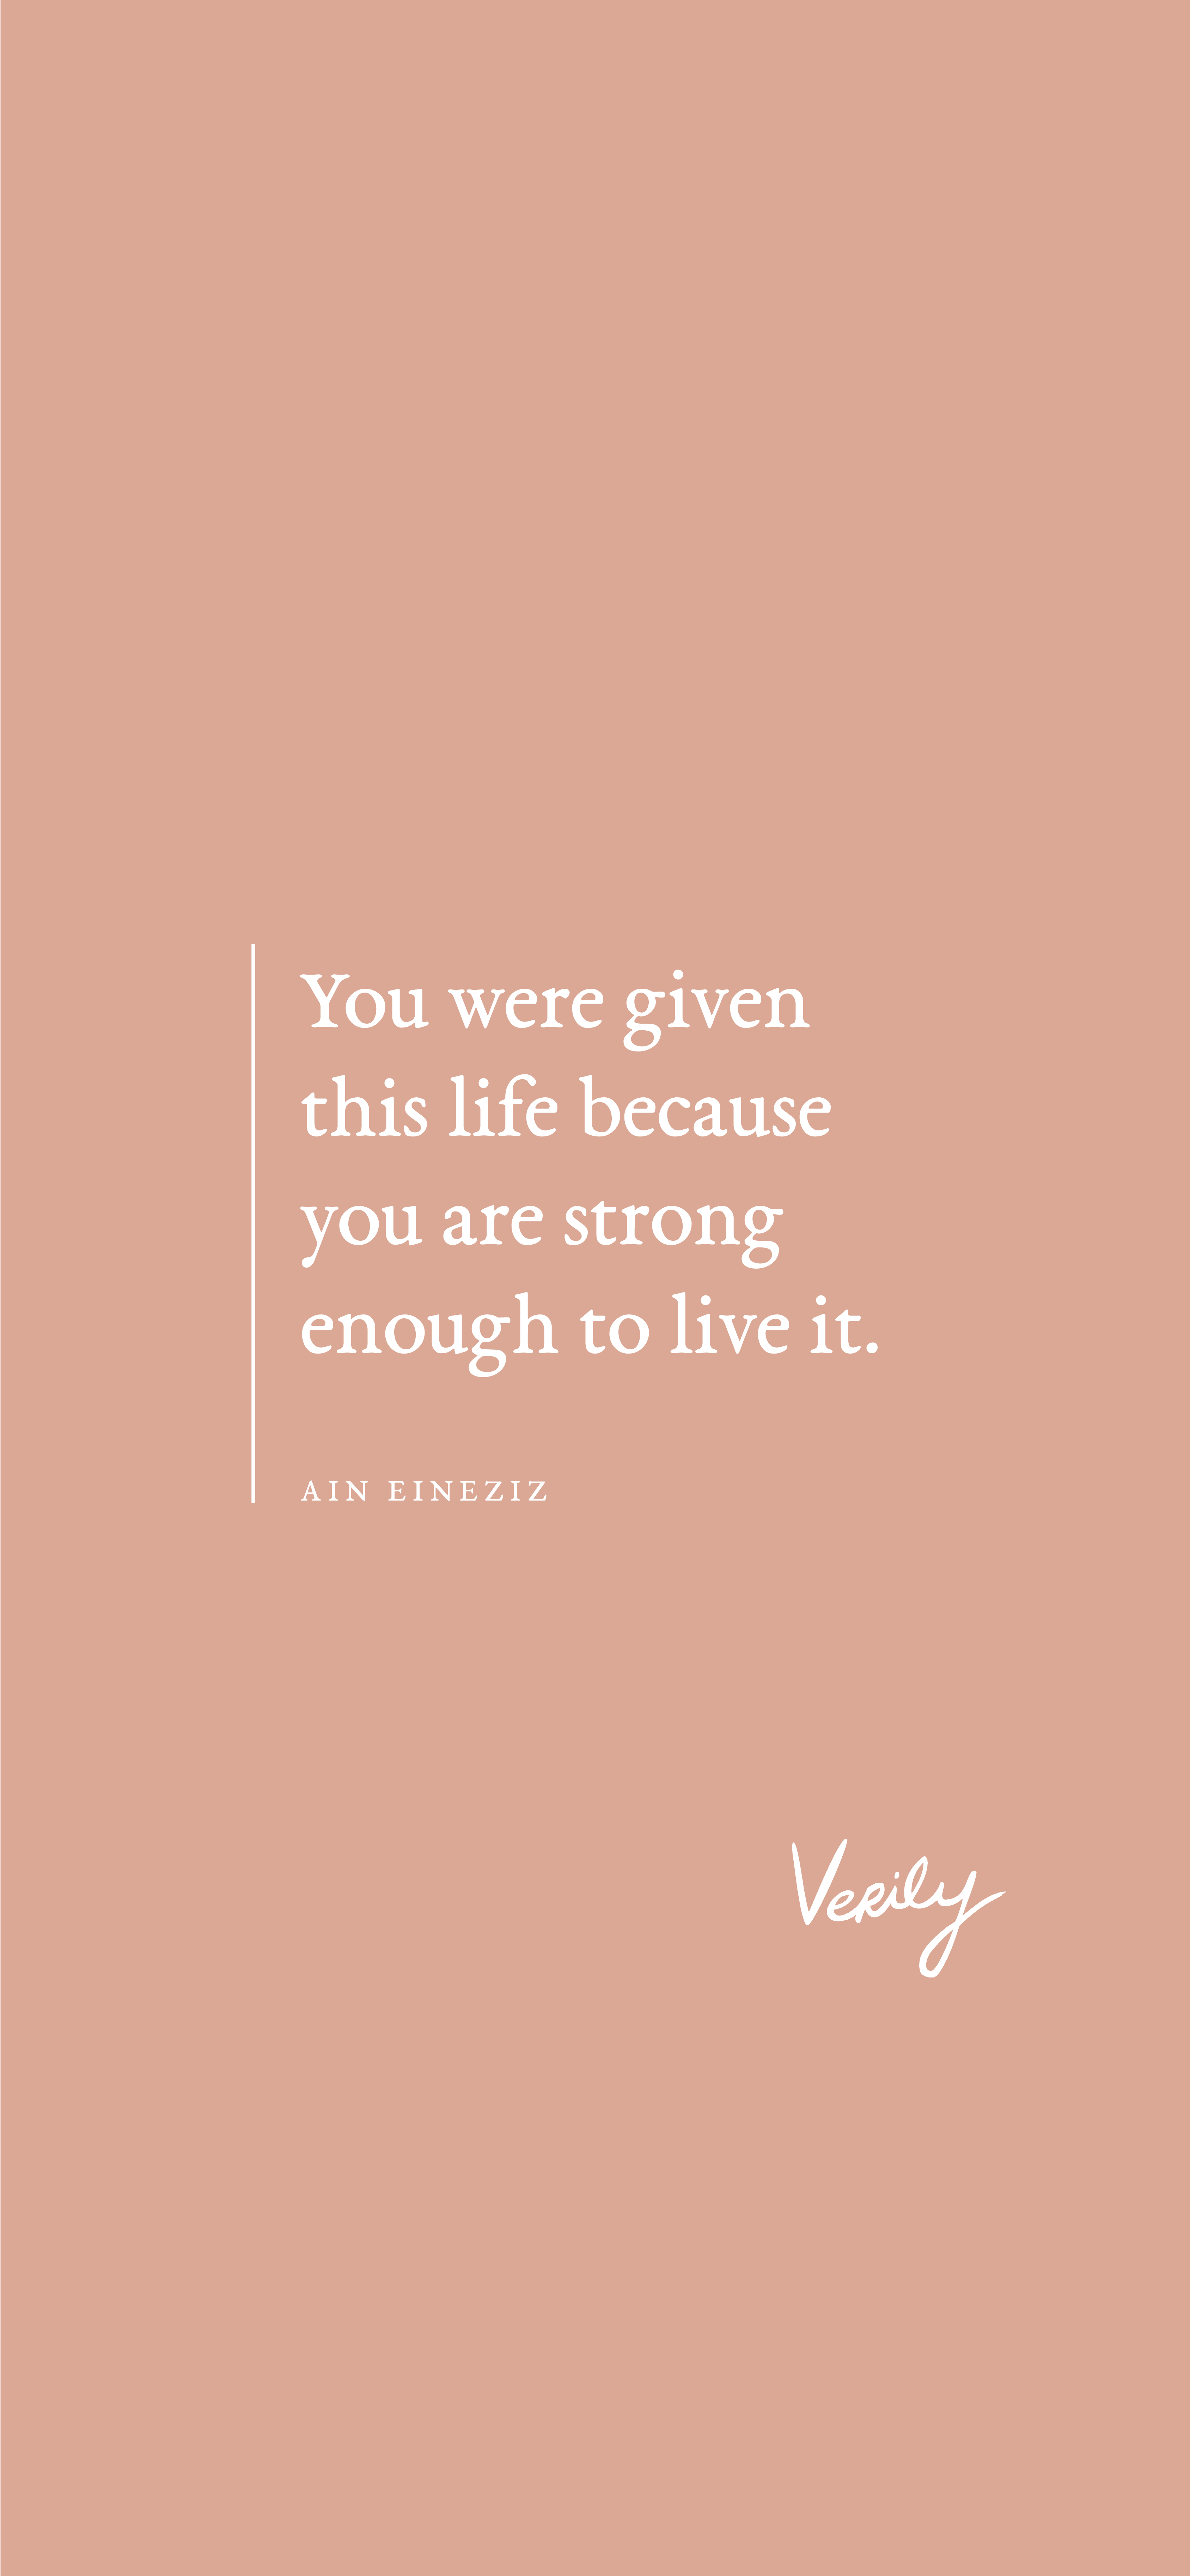 A quote from the book, you were given life to live it - September